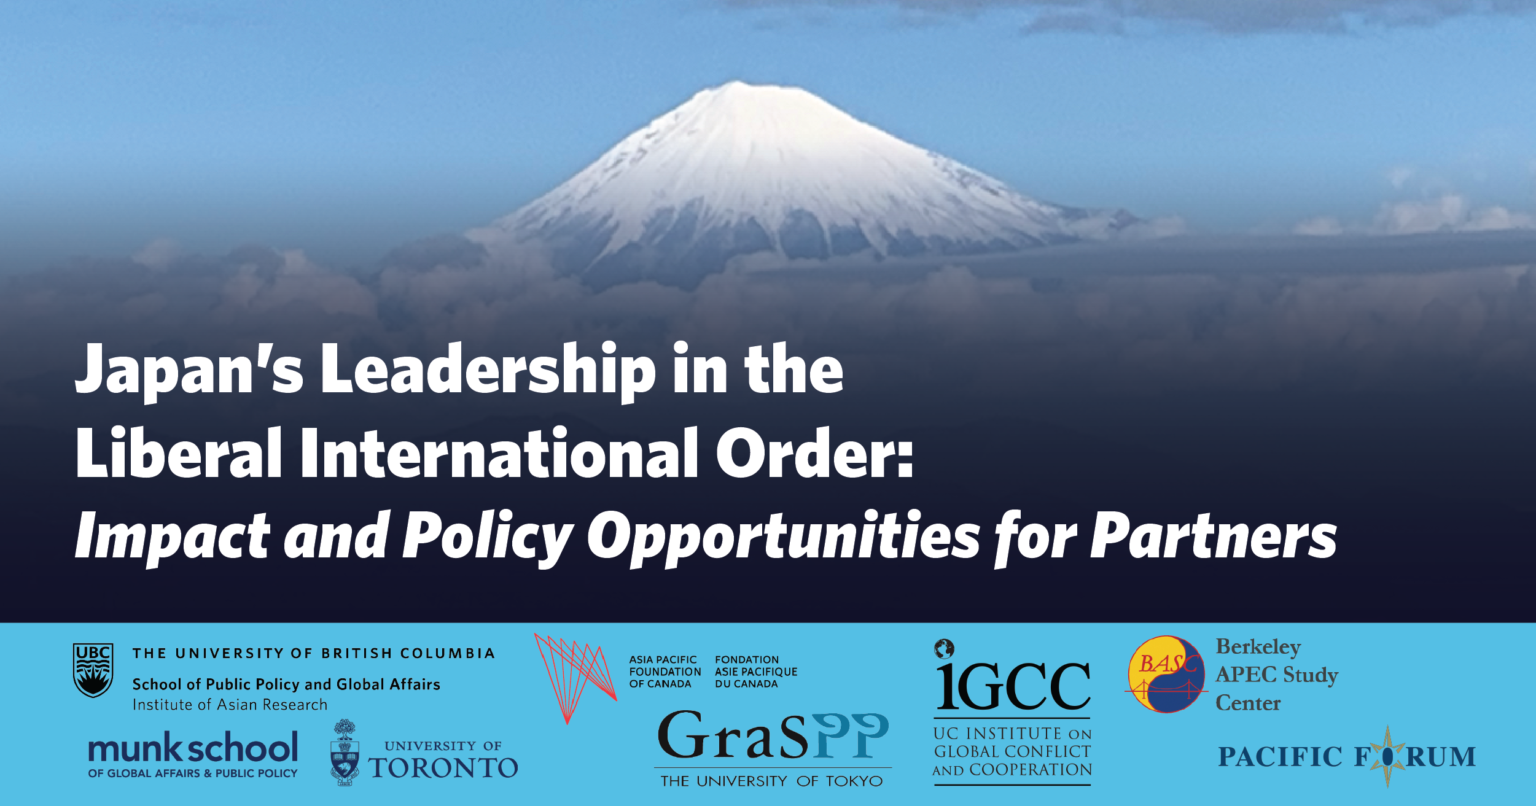 Poster for event, title in white text that reads "Japan's Leadership in the Liberal International Order:" and "Impact and Policy Opportunities for Partners" in italics. Mt. Fuji in background, a white snow-capped mountain. Bottom is blue rectangle with logos.